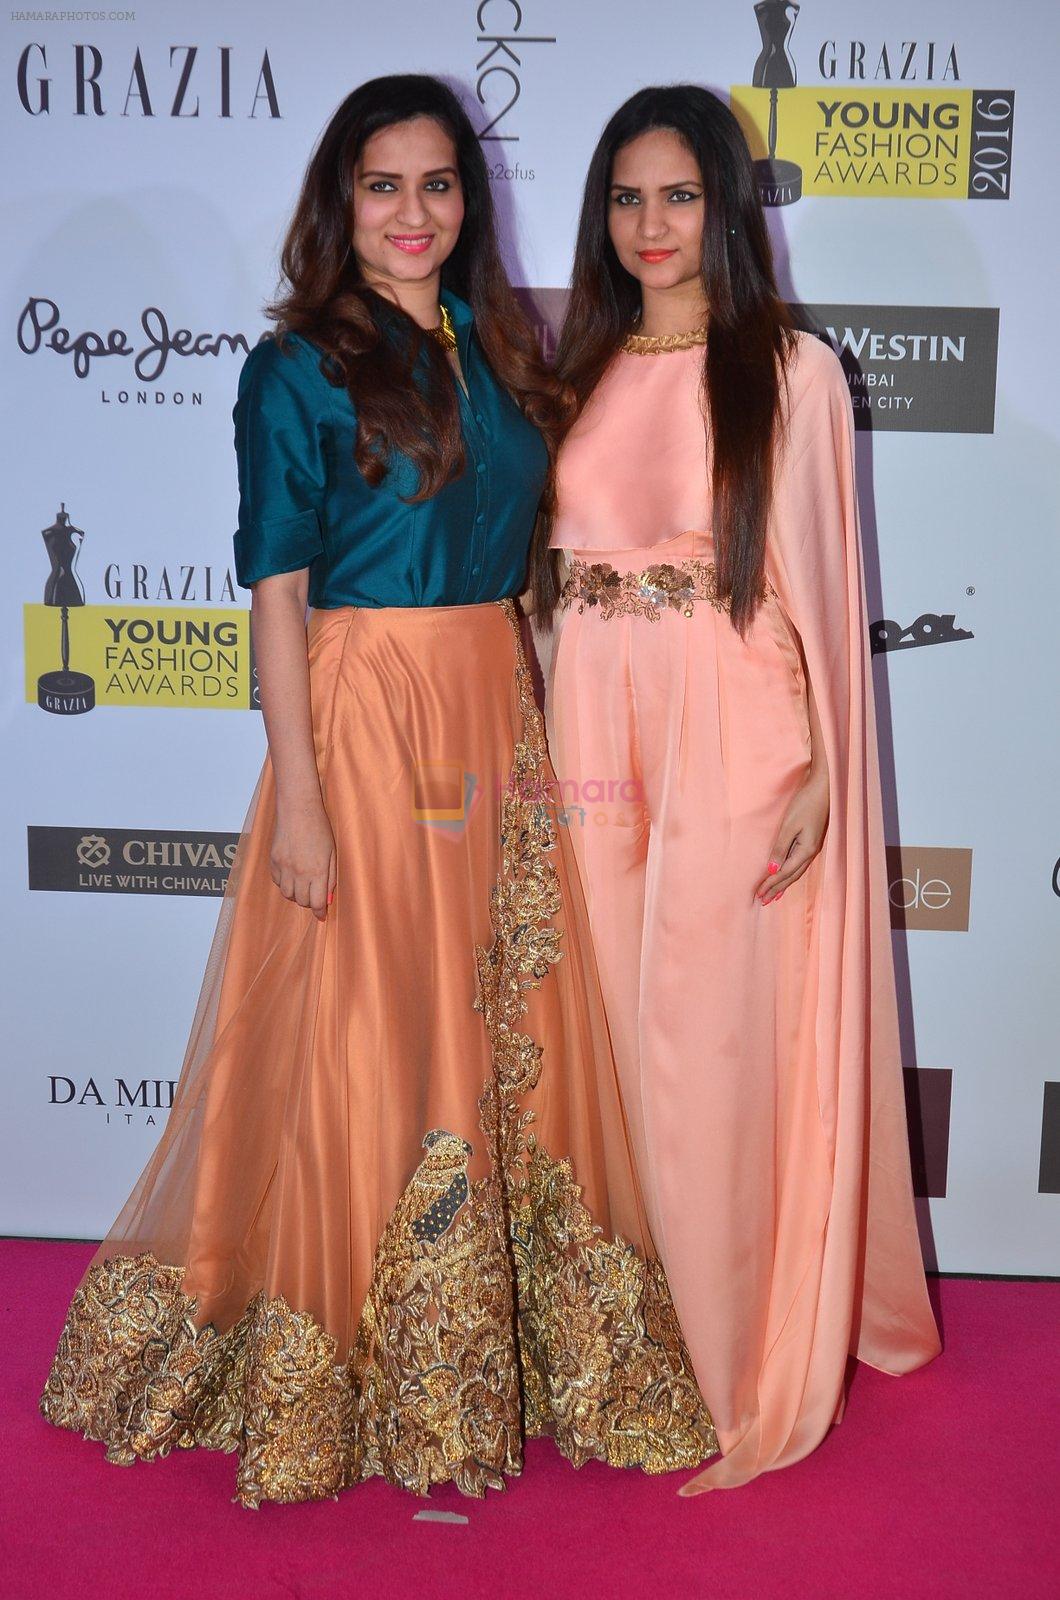 at Grazia Young Fashion Awards 2016 Red Carpet on 7th April 2016